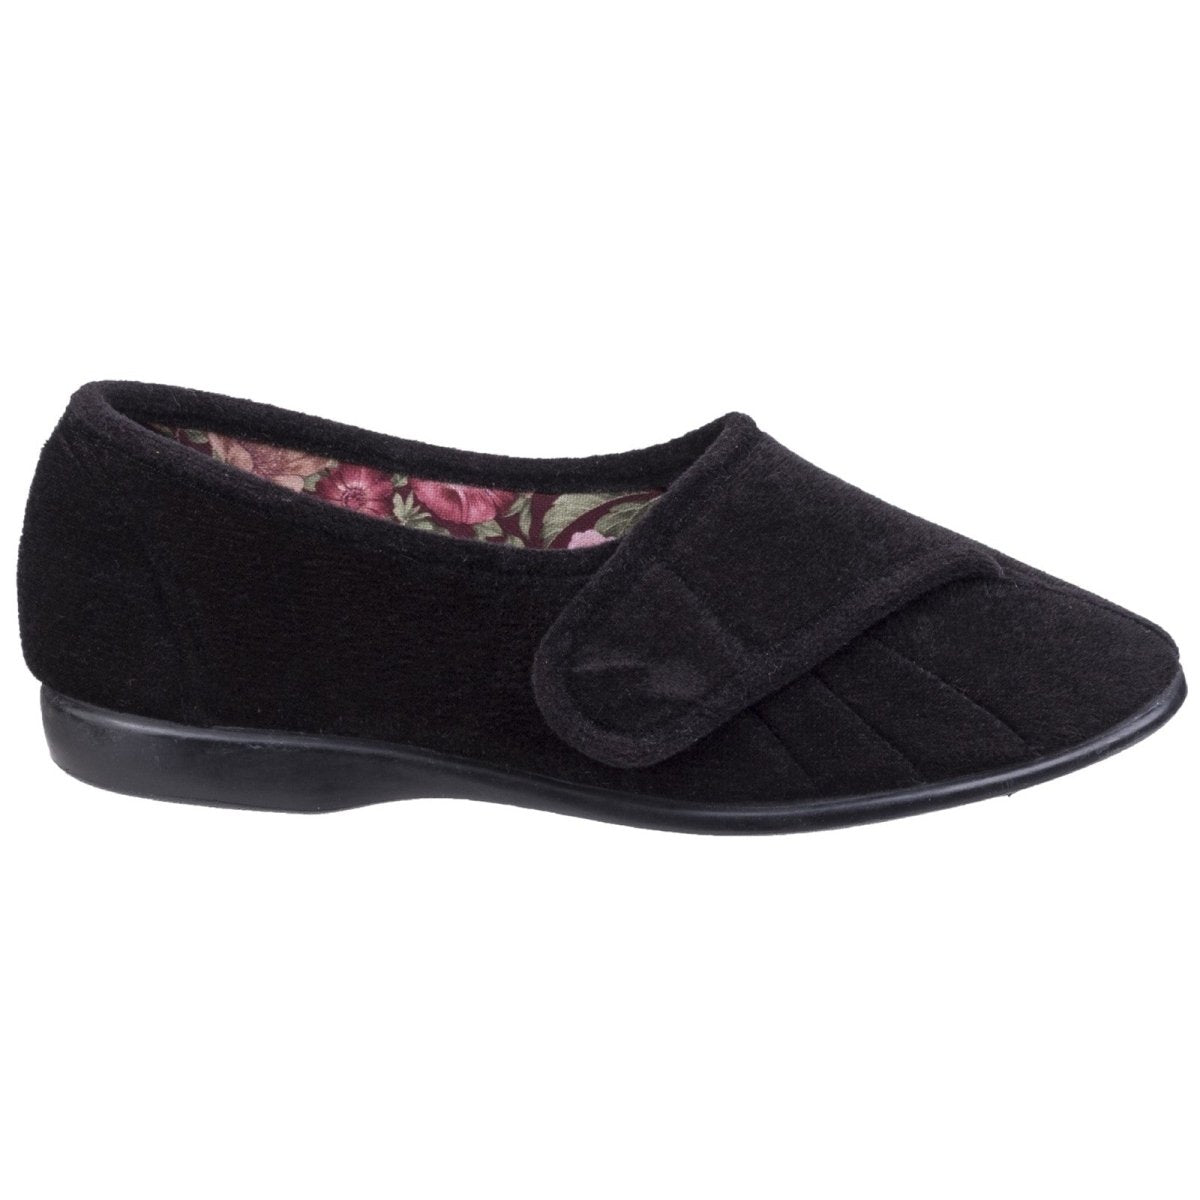 GBS Audrey Touch Fastening Slipper - Shoe Store Direct